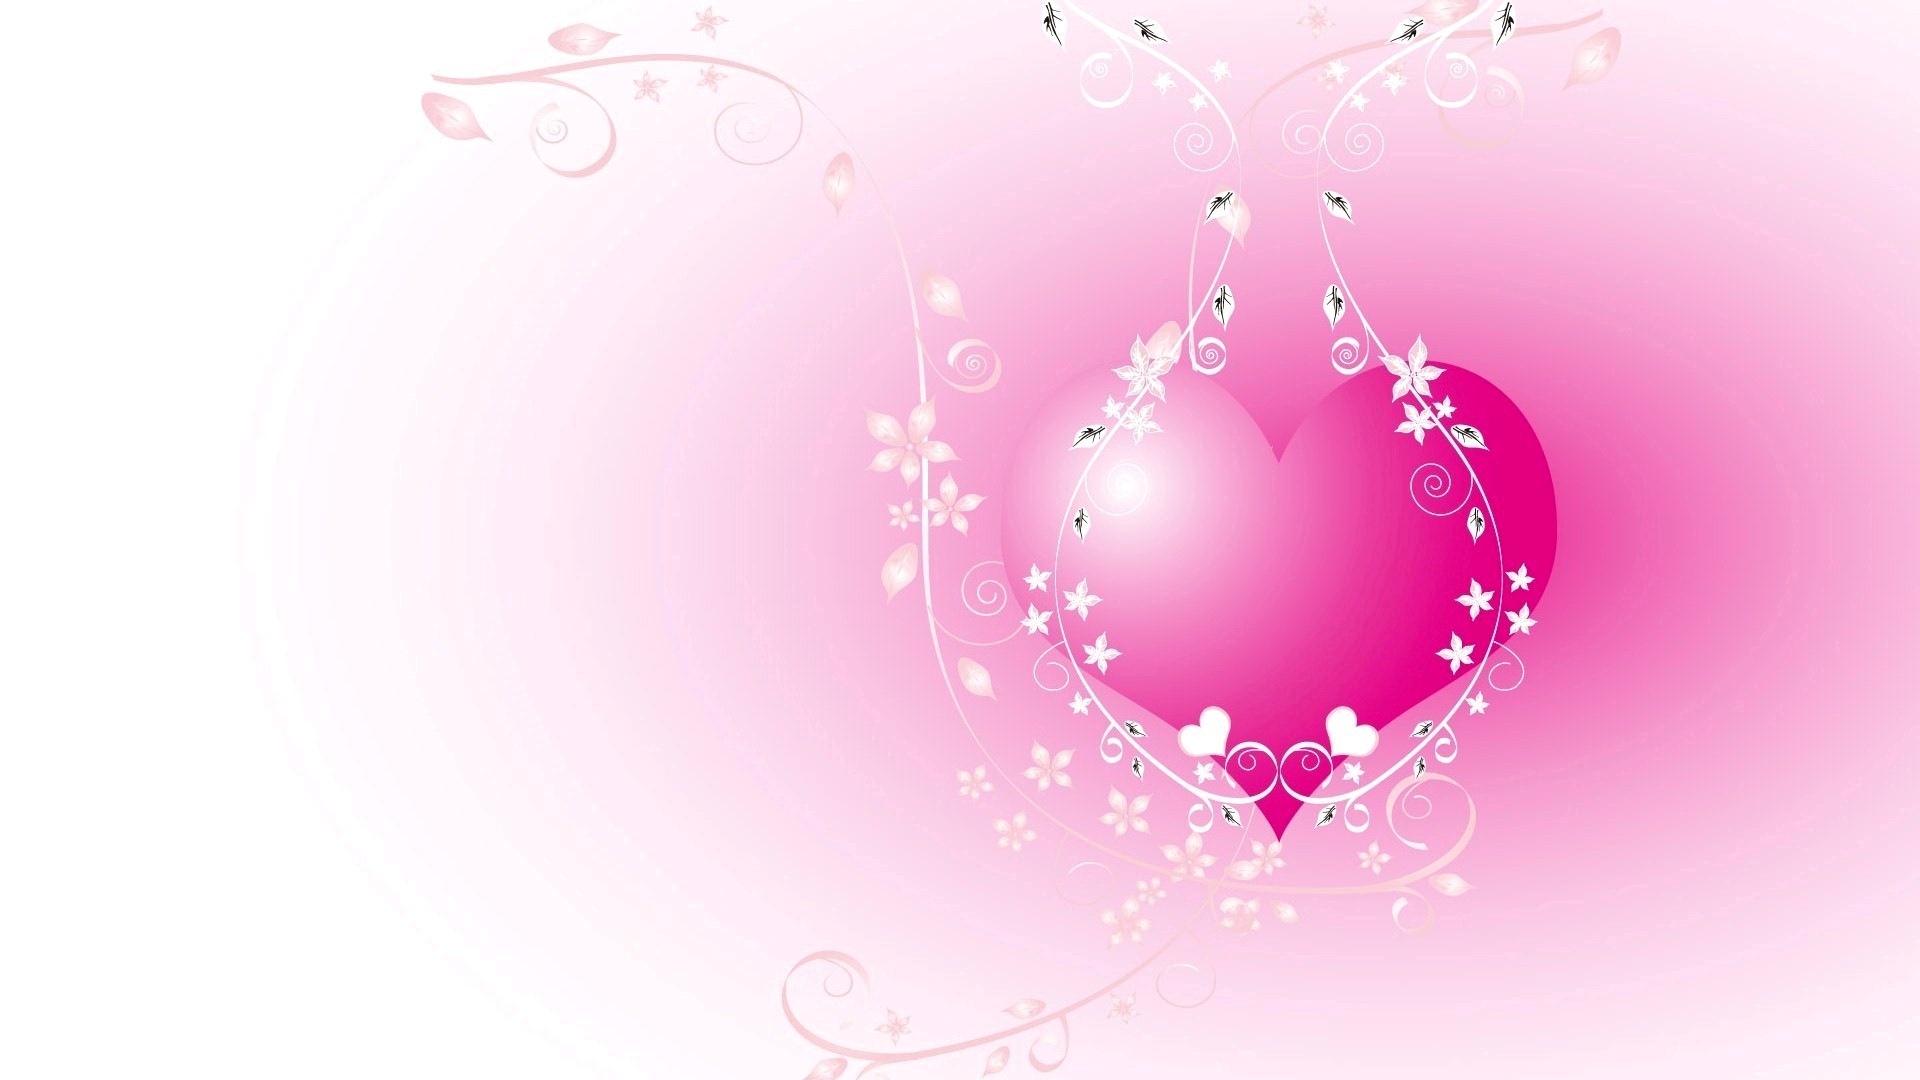 Pink Heart With White Vector Design - Free Pink Backgrounds For Ipad Pro 9.7 - HD Wallpaper 